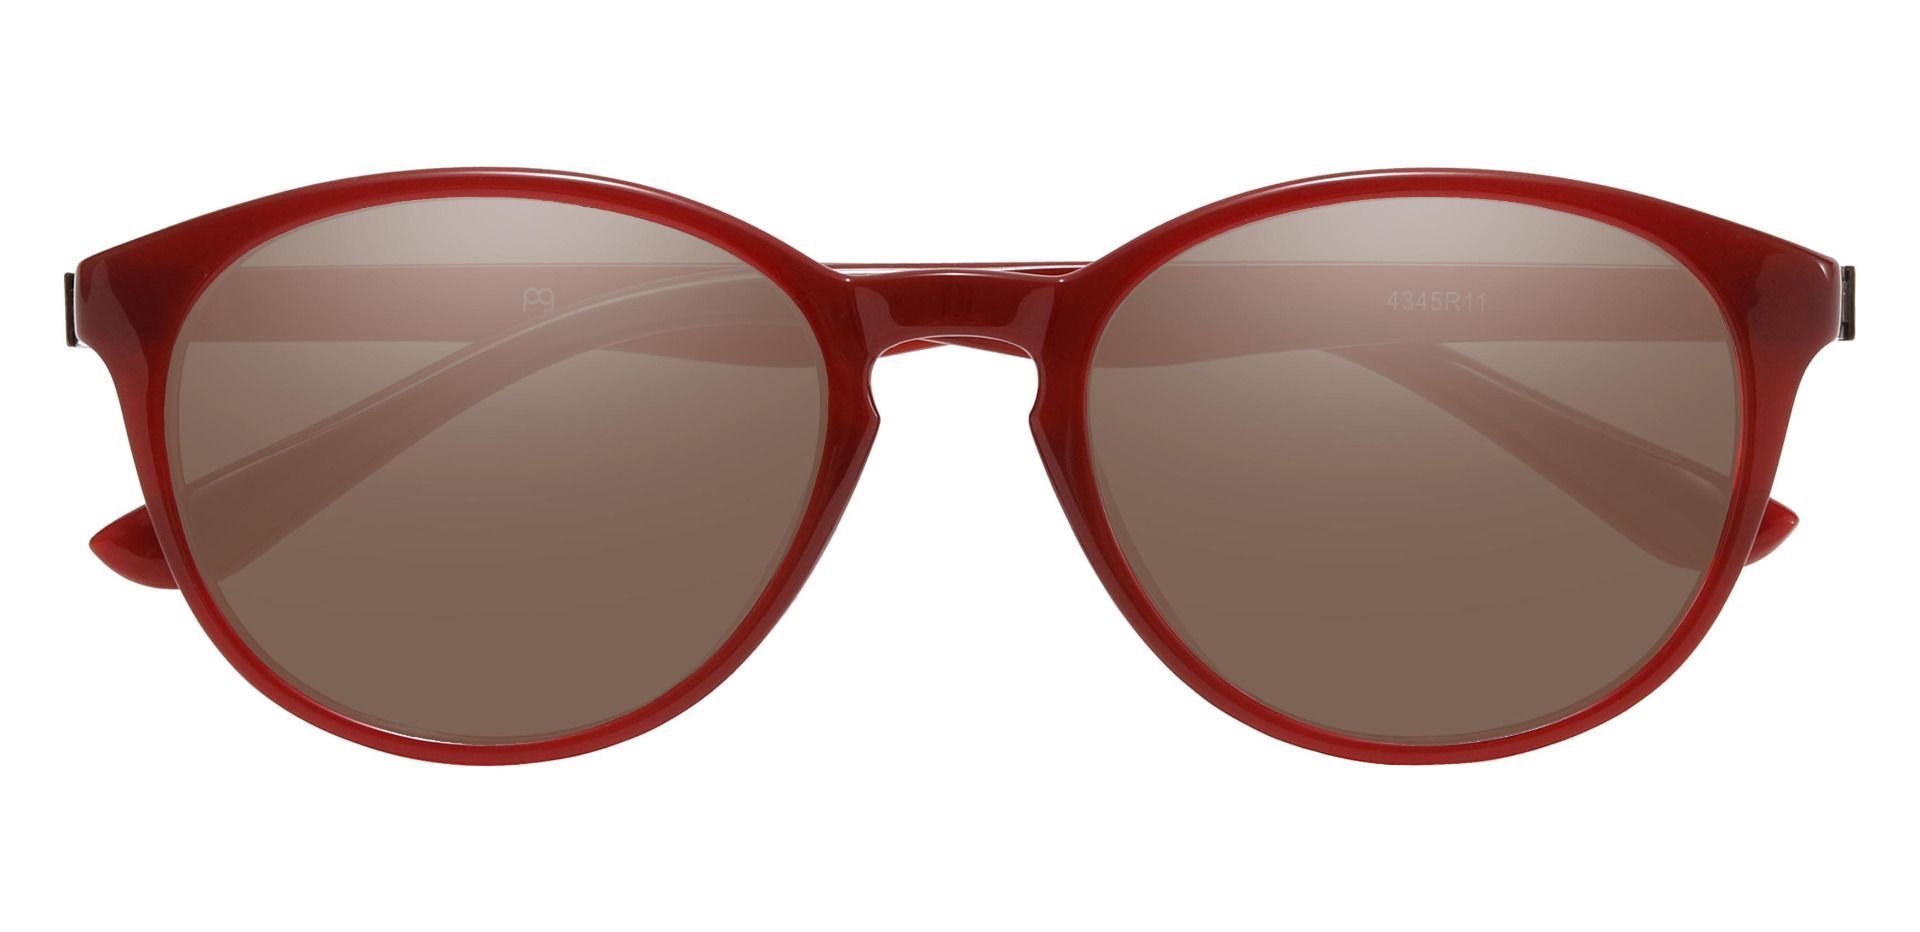 Celia Oval Non-Rx Sunglasses - Red Frame With Brown Lenses